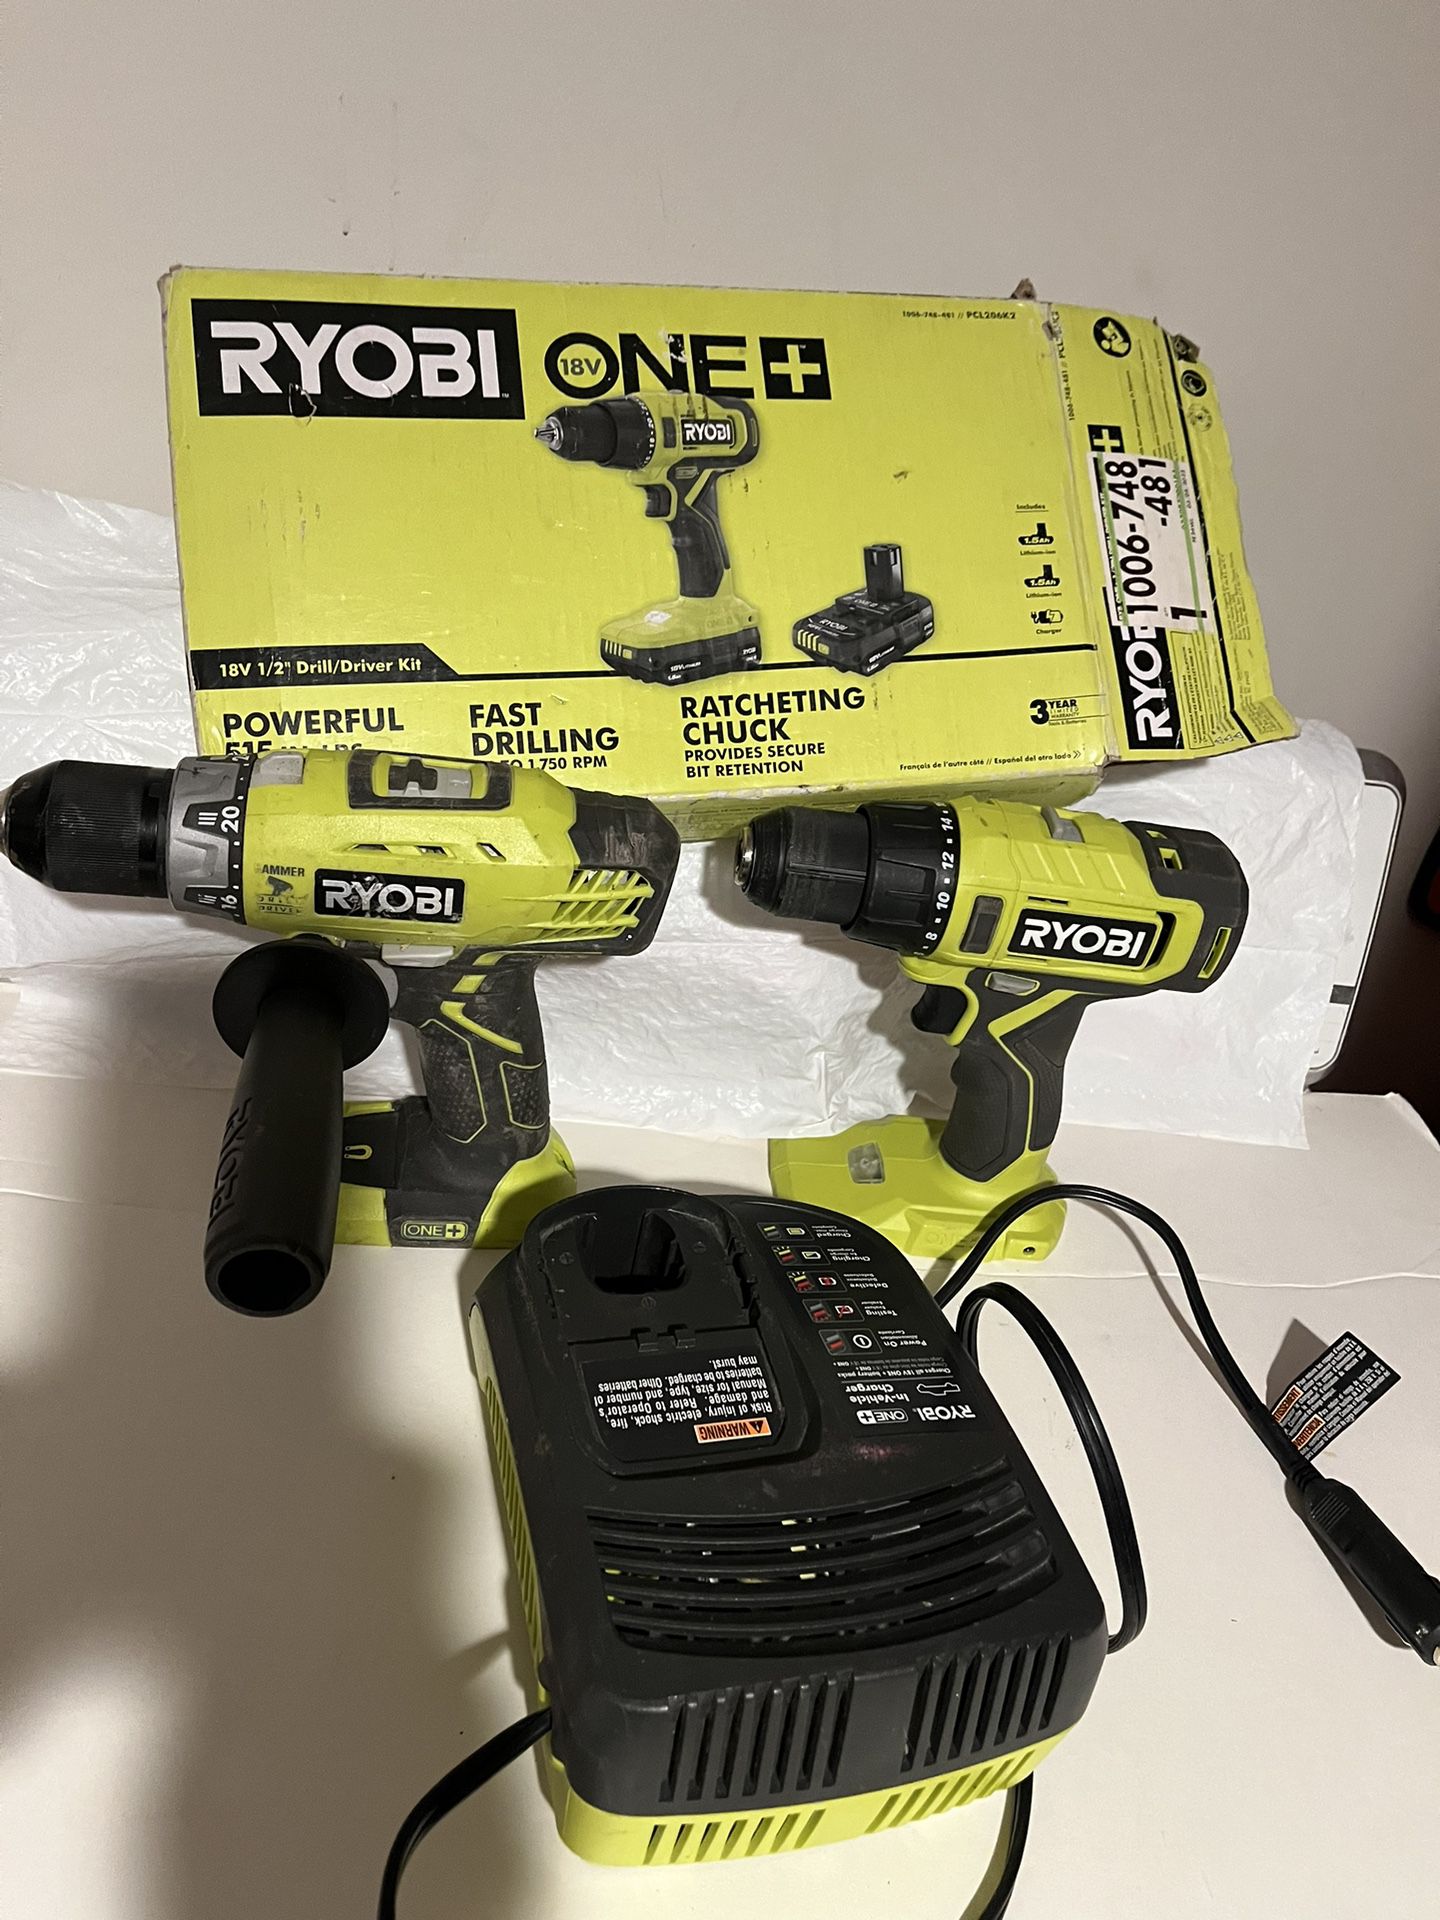 RYOBY 18 V Drill /Driver =2 Car Charger= 1